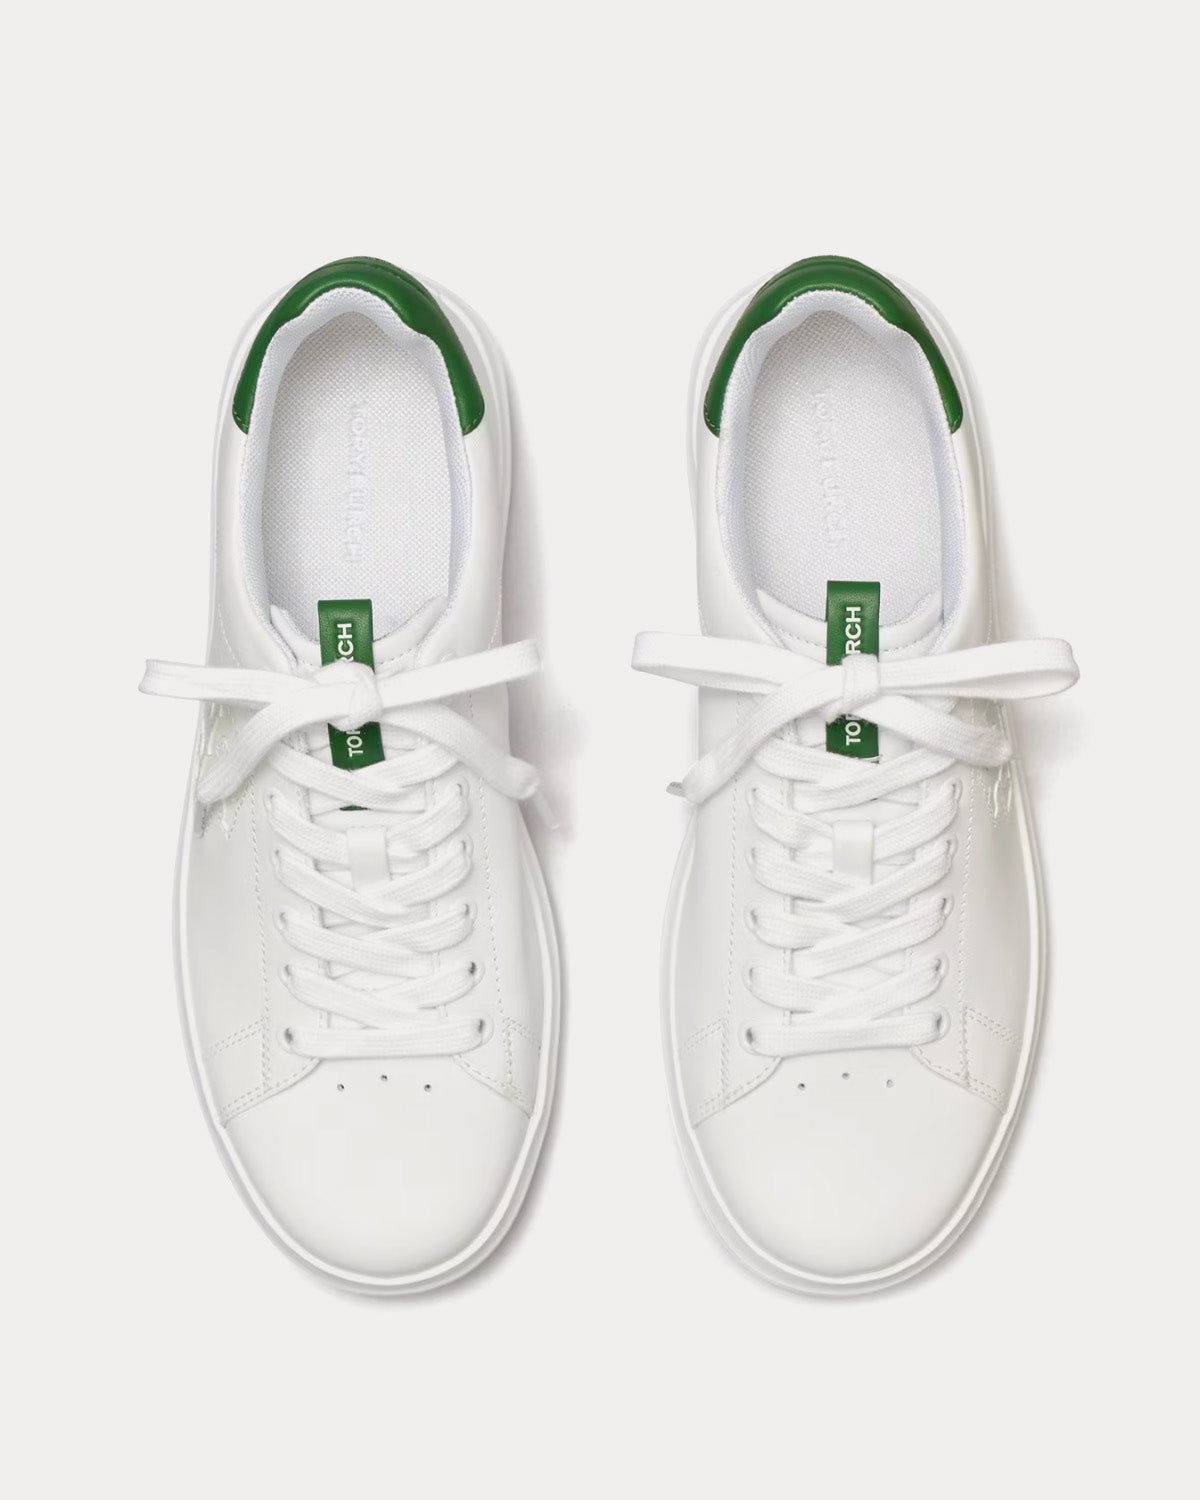 Tory Burch - Double T Howell Court White / Arugula Green Low Top Sneakers